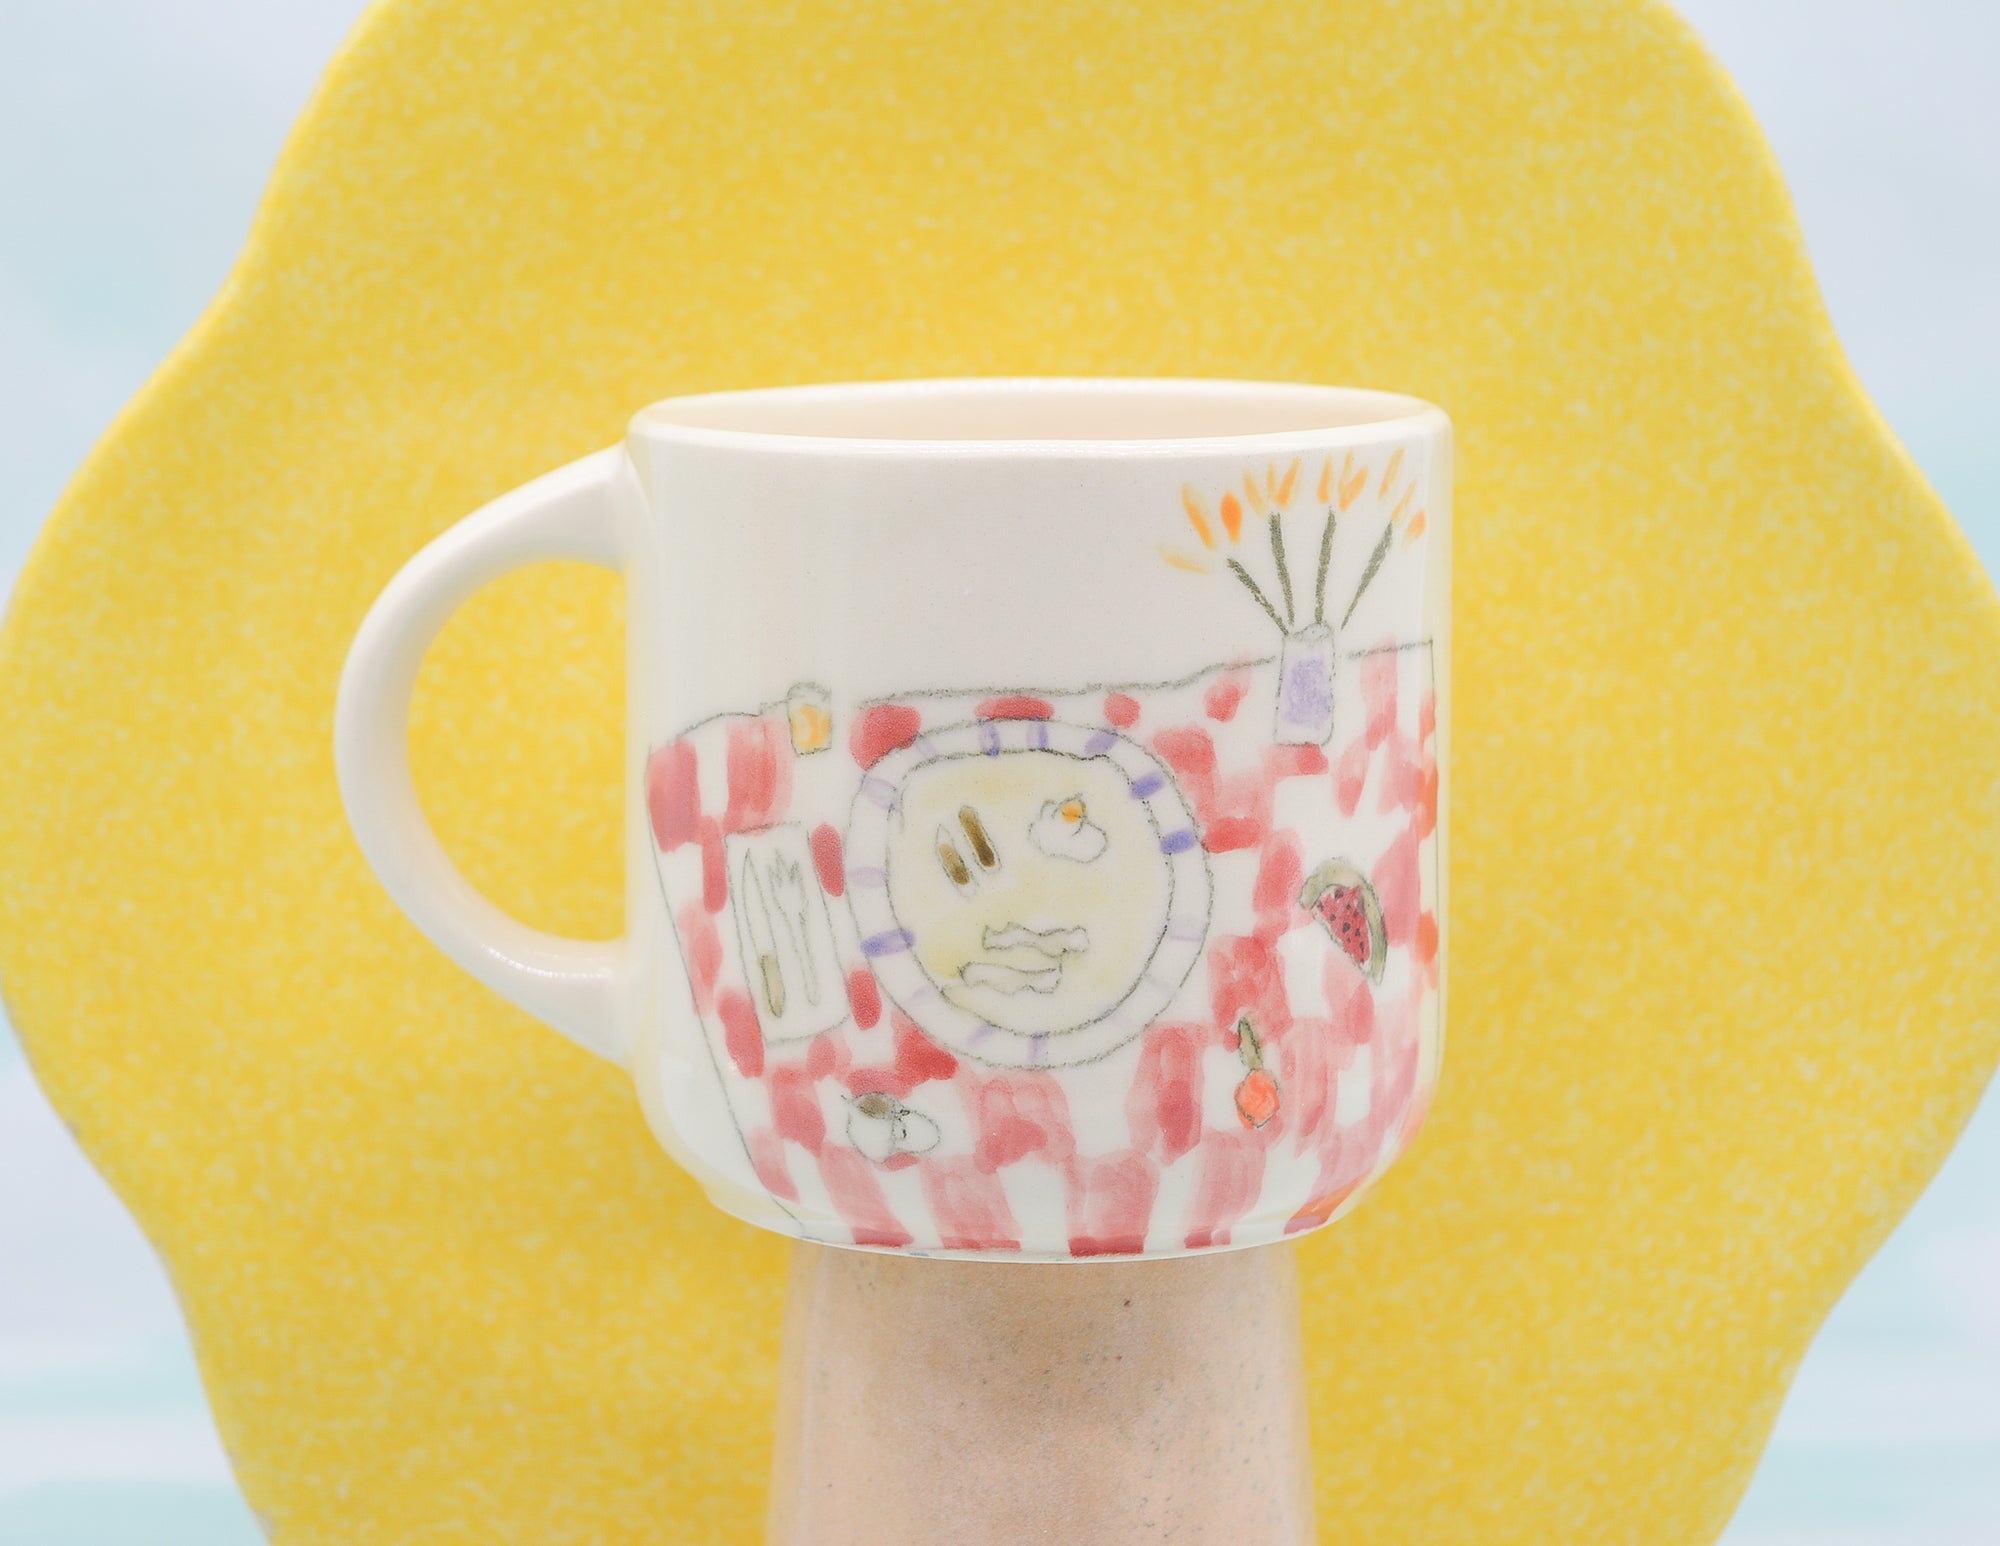 Breakfast Mug with Checkered Tablecloth